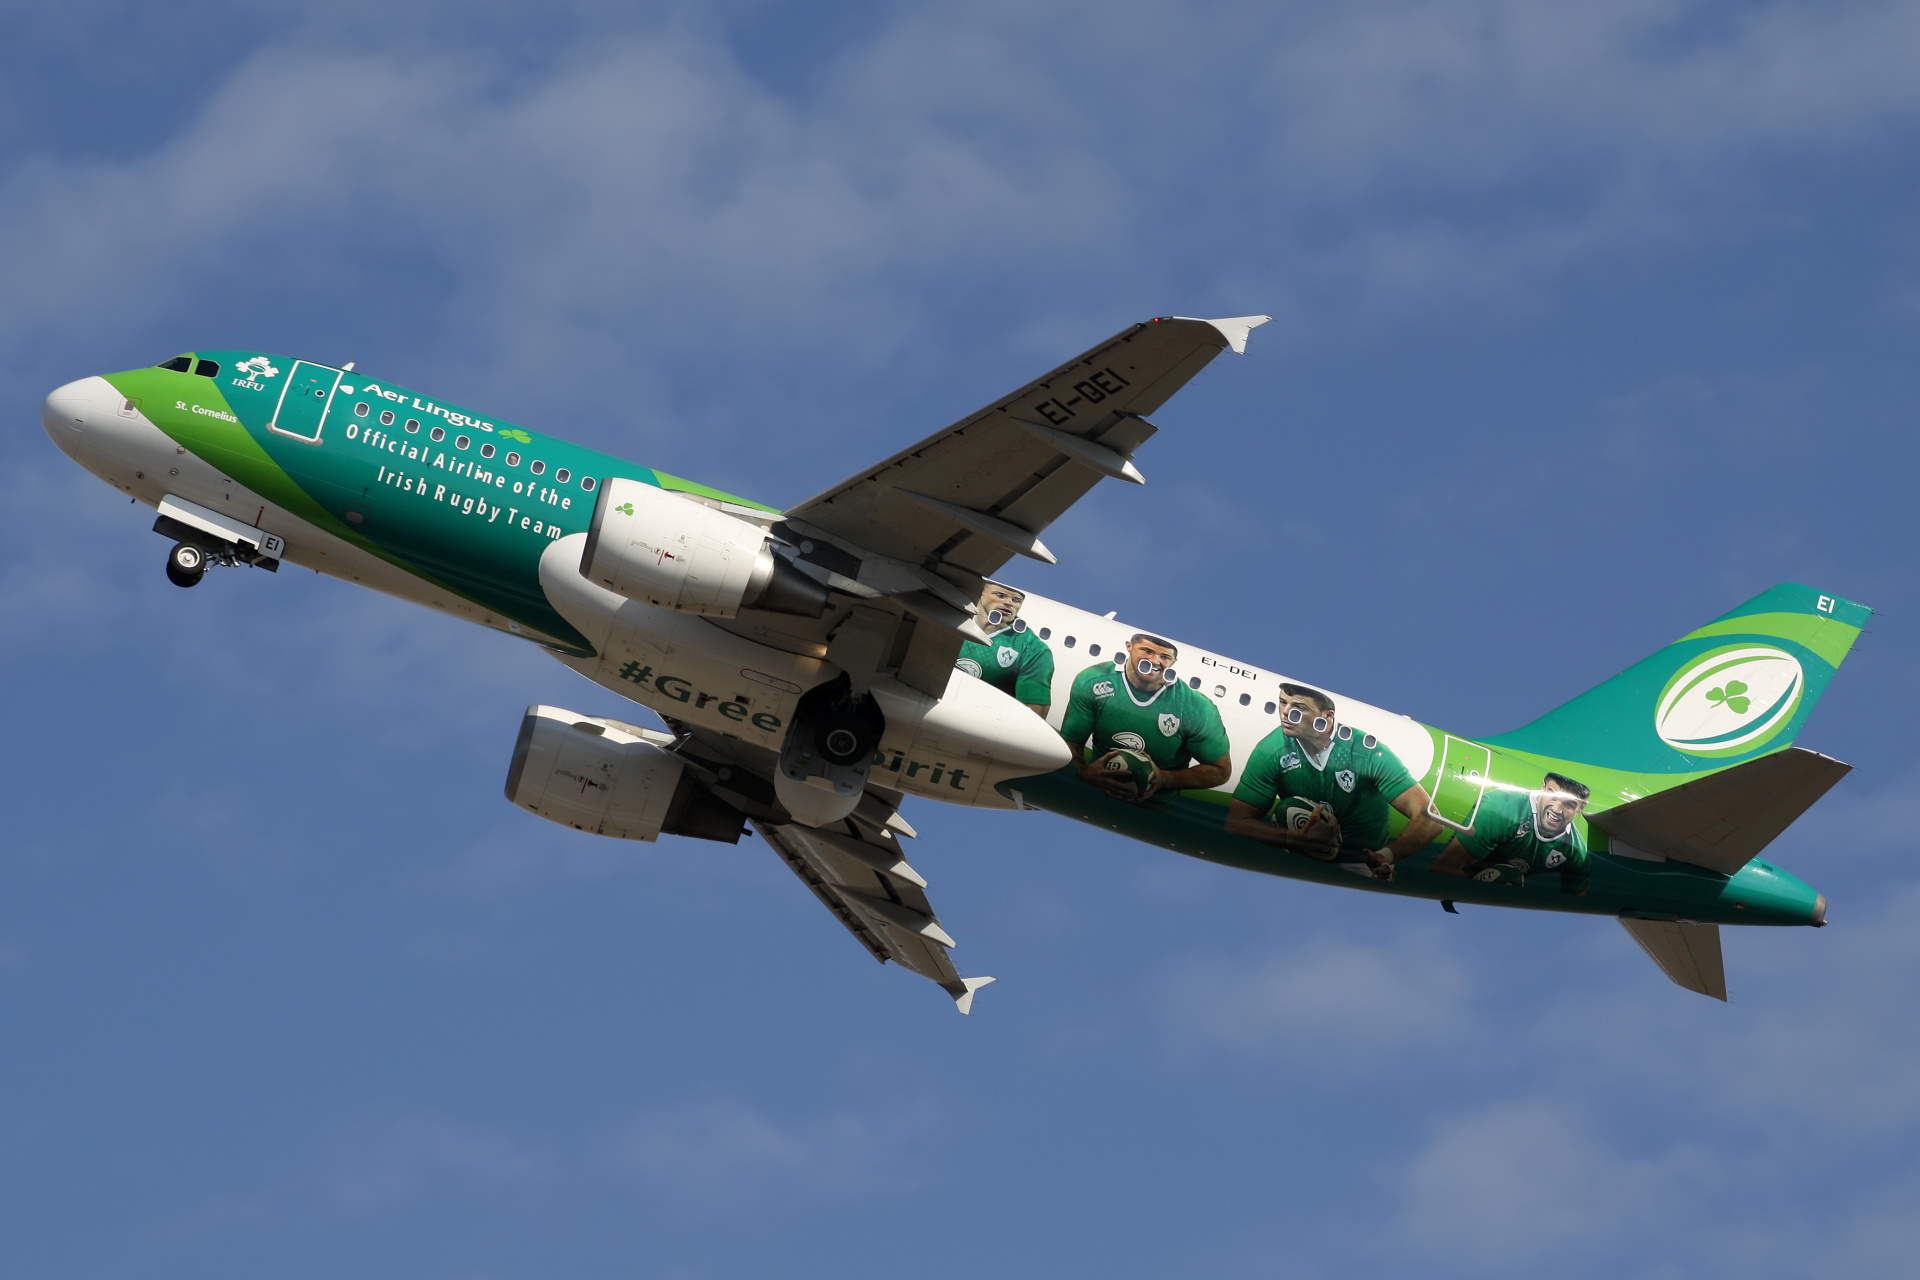 EI-DEI (Official Airline of the Irish Rugby Team livery) (Aircraft » EPWA Spotting » Airbus A320-200 » Aer Lingus)